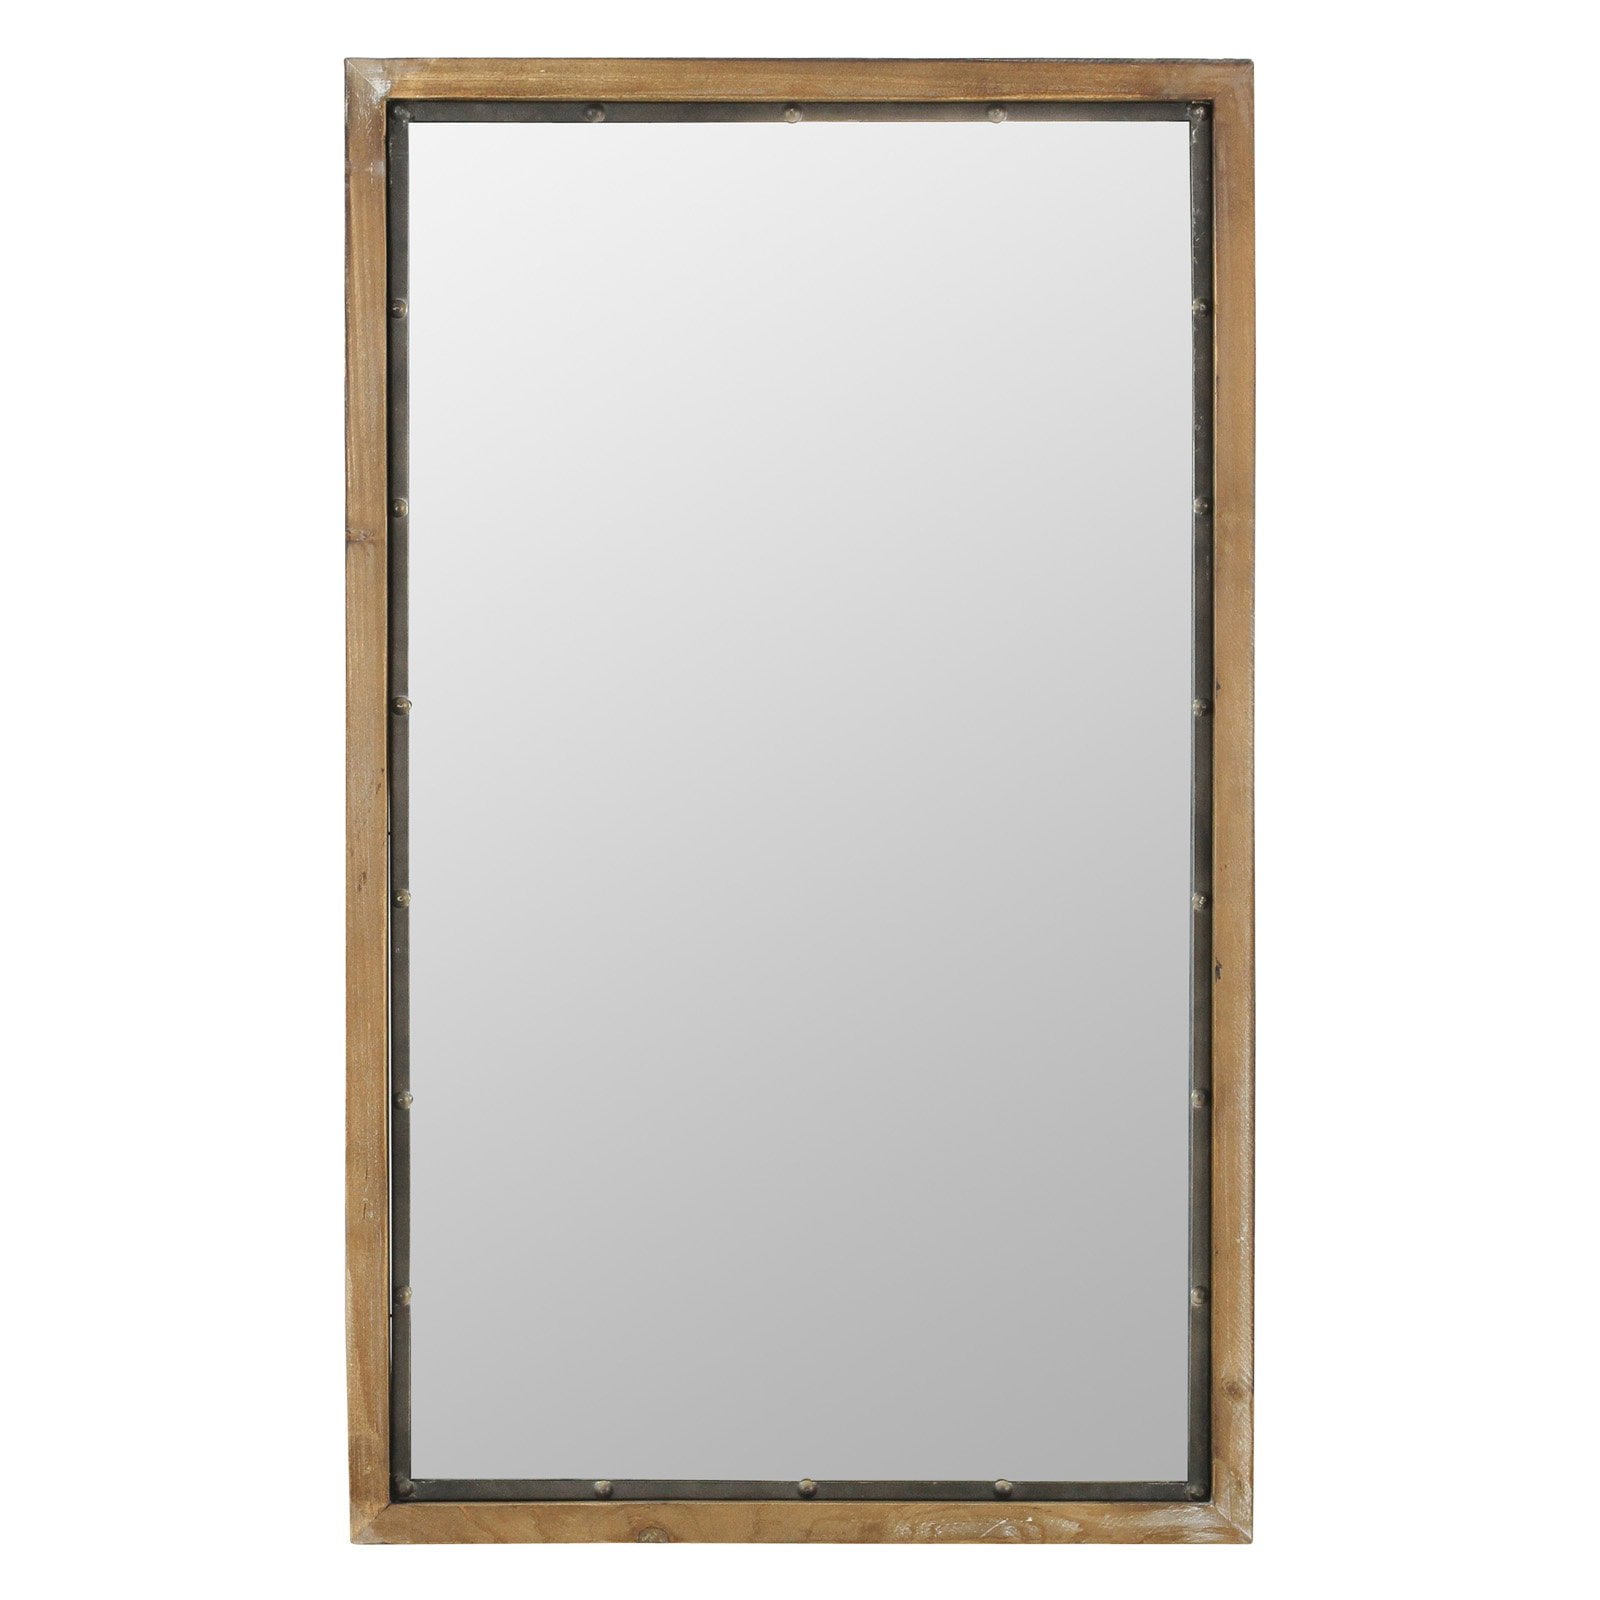 Picture of Aspire 5520 Marlon Rustic Wood Wall Mirror, Brown